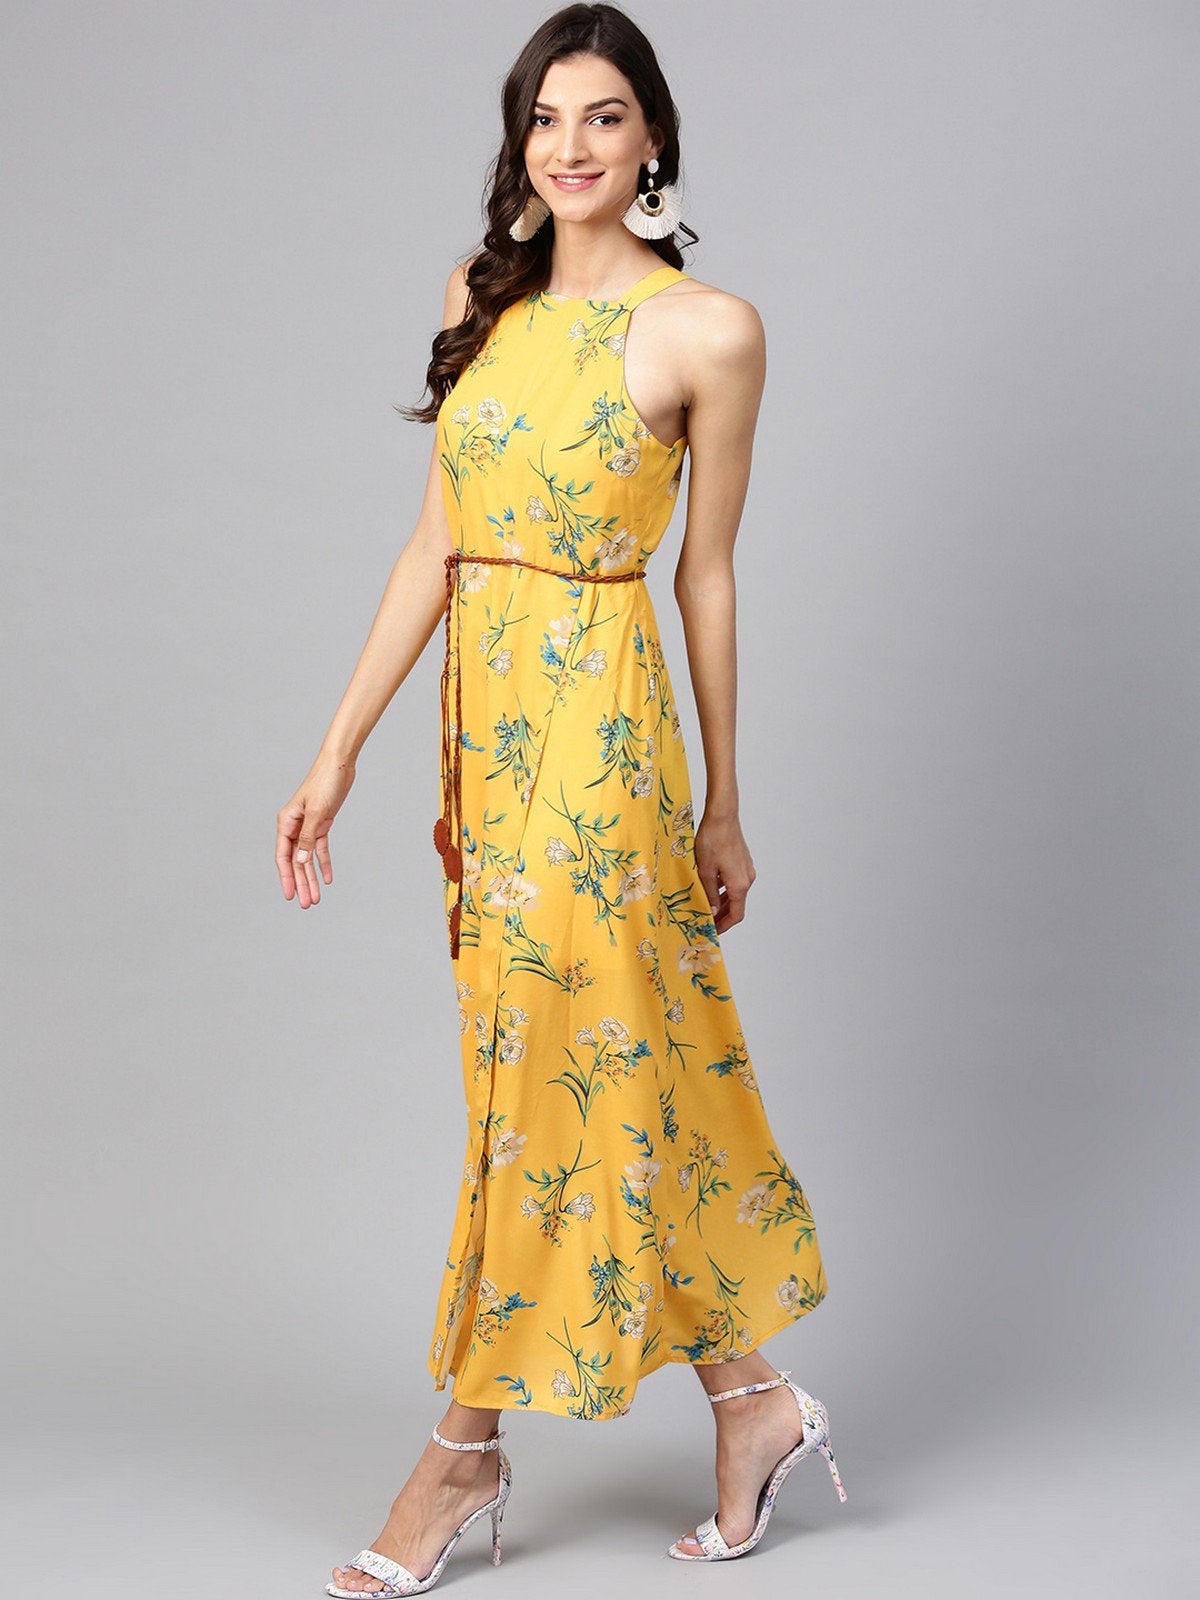 Women's Floral Strappy In-cut Maxi Dress With Belt - Pannkh